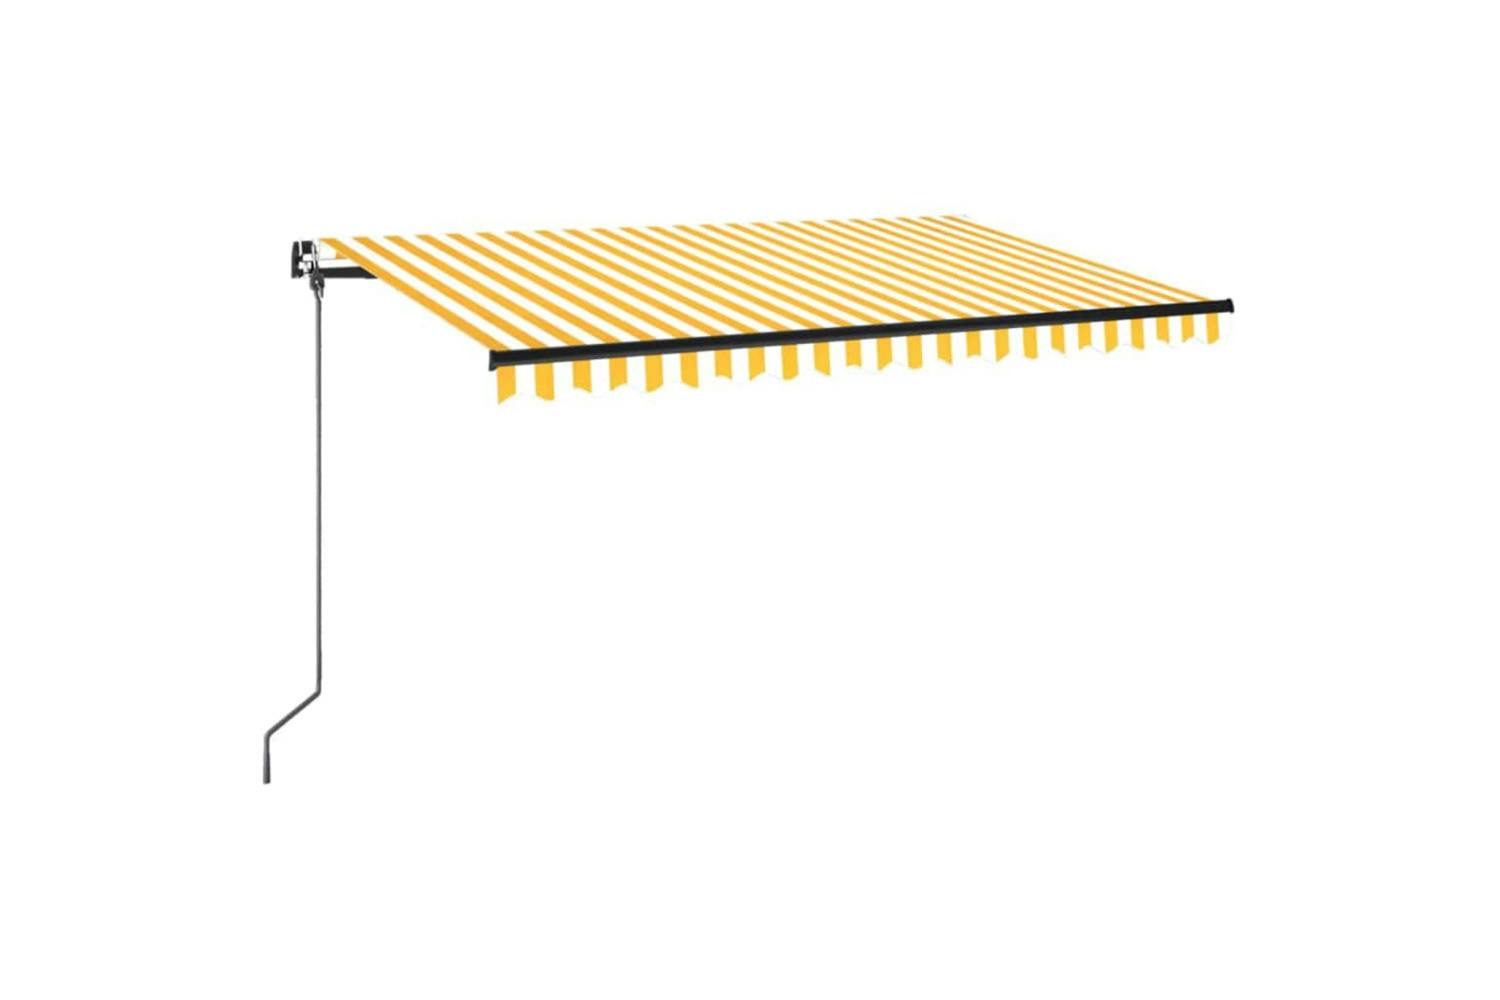 Vidaxl 3069178 Manual Retractable Awning 400x350 Cm Yellow And White